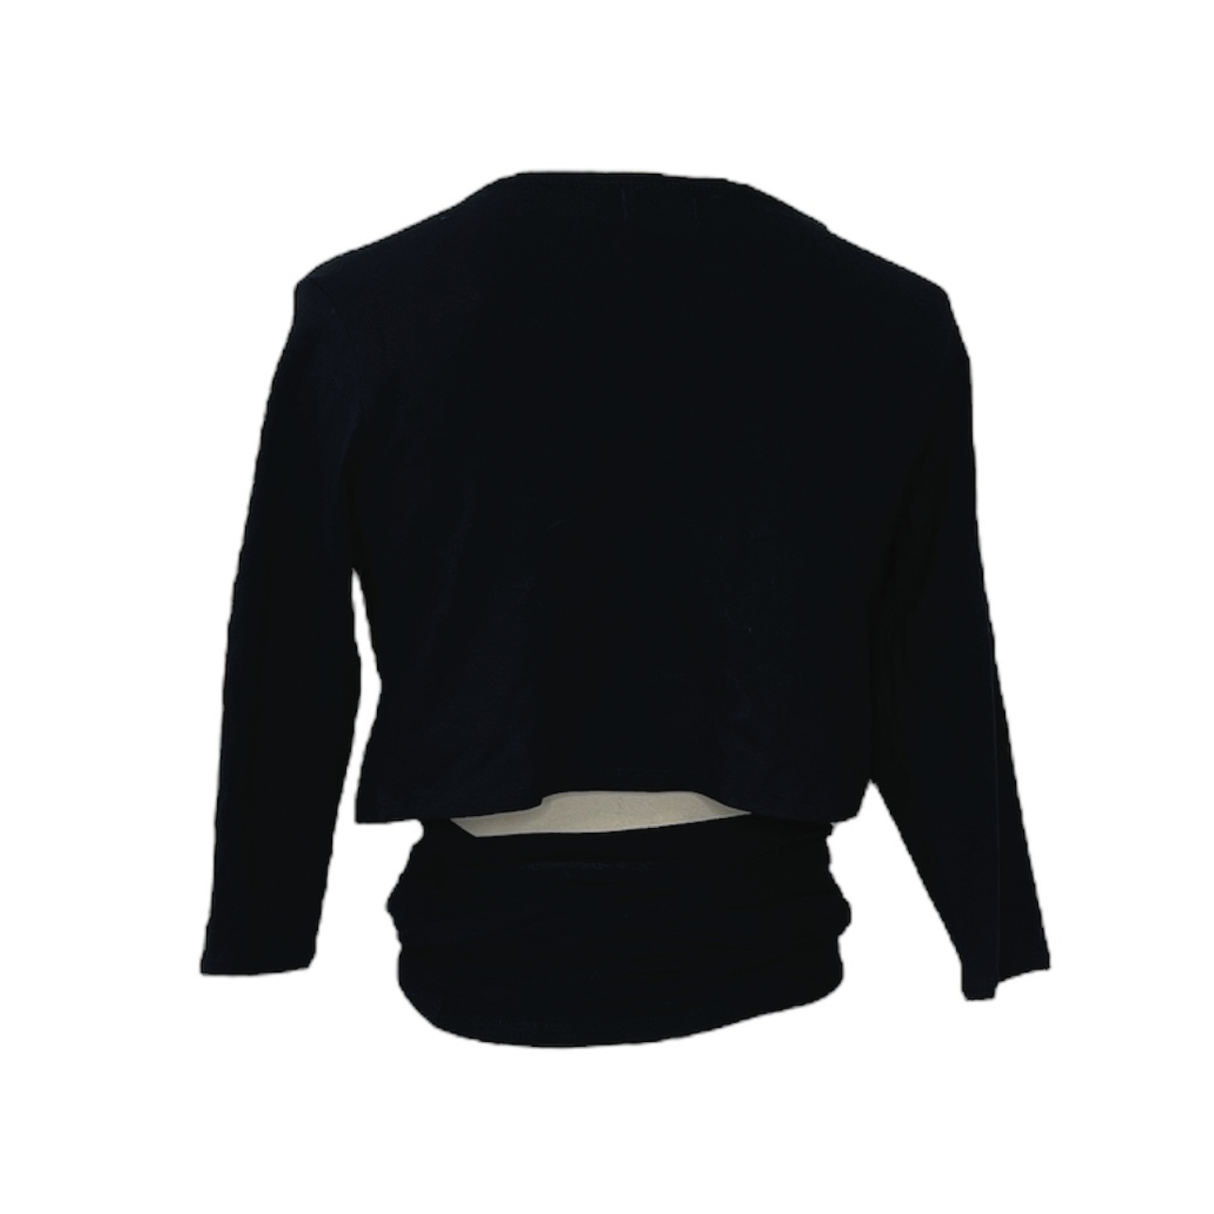 A Second chance - Isabella Oliver Long Sleeve Jacket 5  black women - Delivery All Over Lebanon